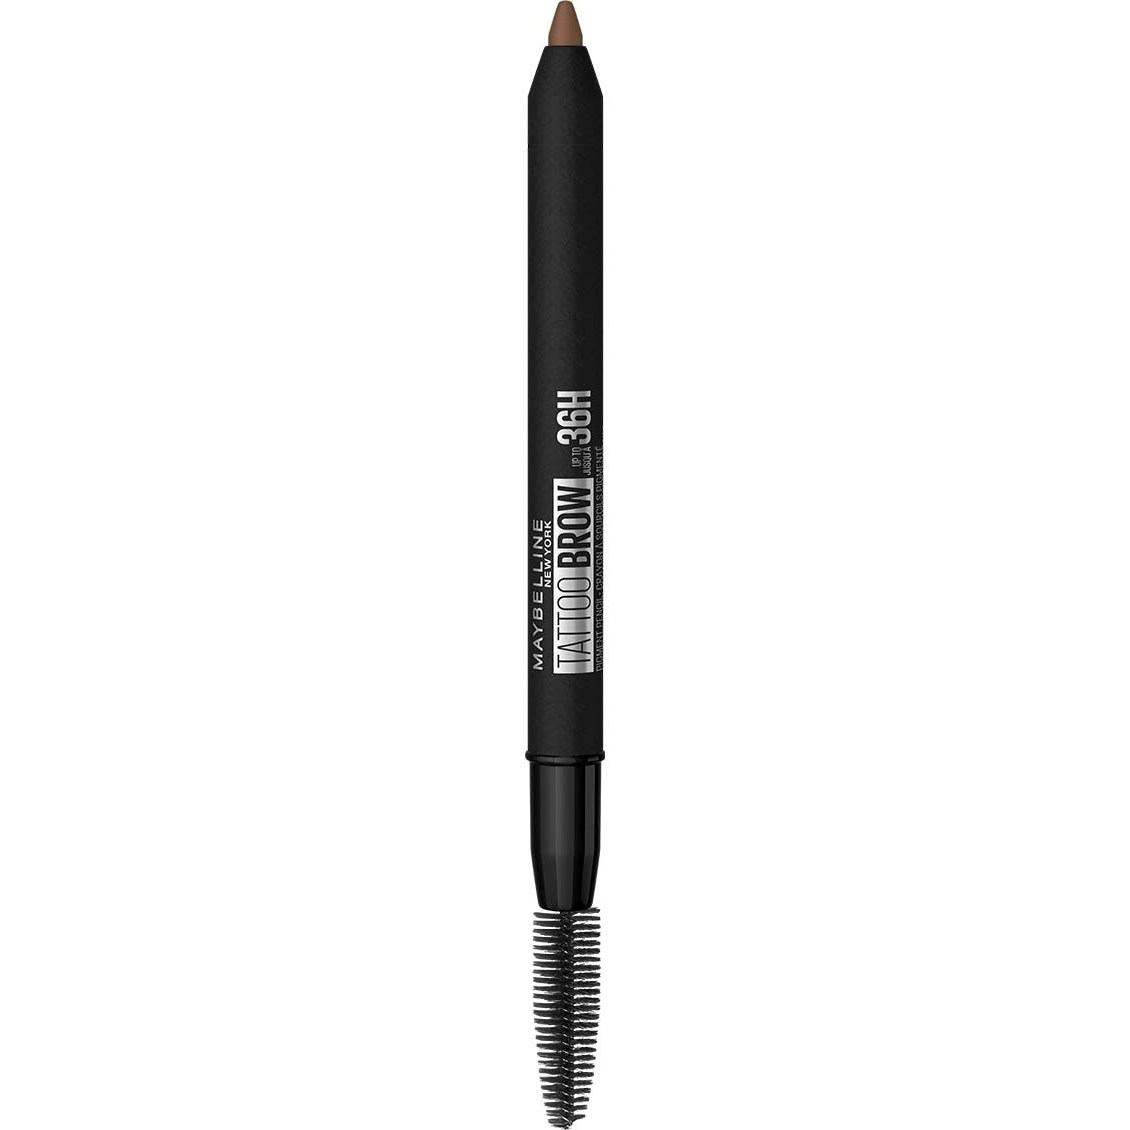 Maybelline New York Tattoo Brow up to 36H Pencil Soft Brown 3